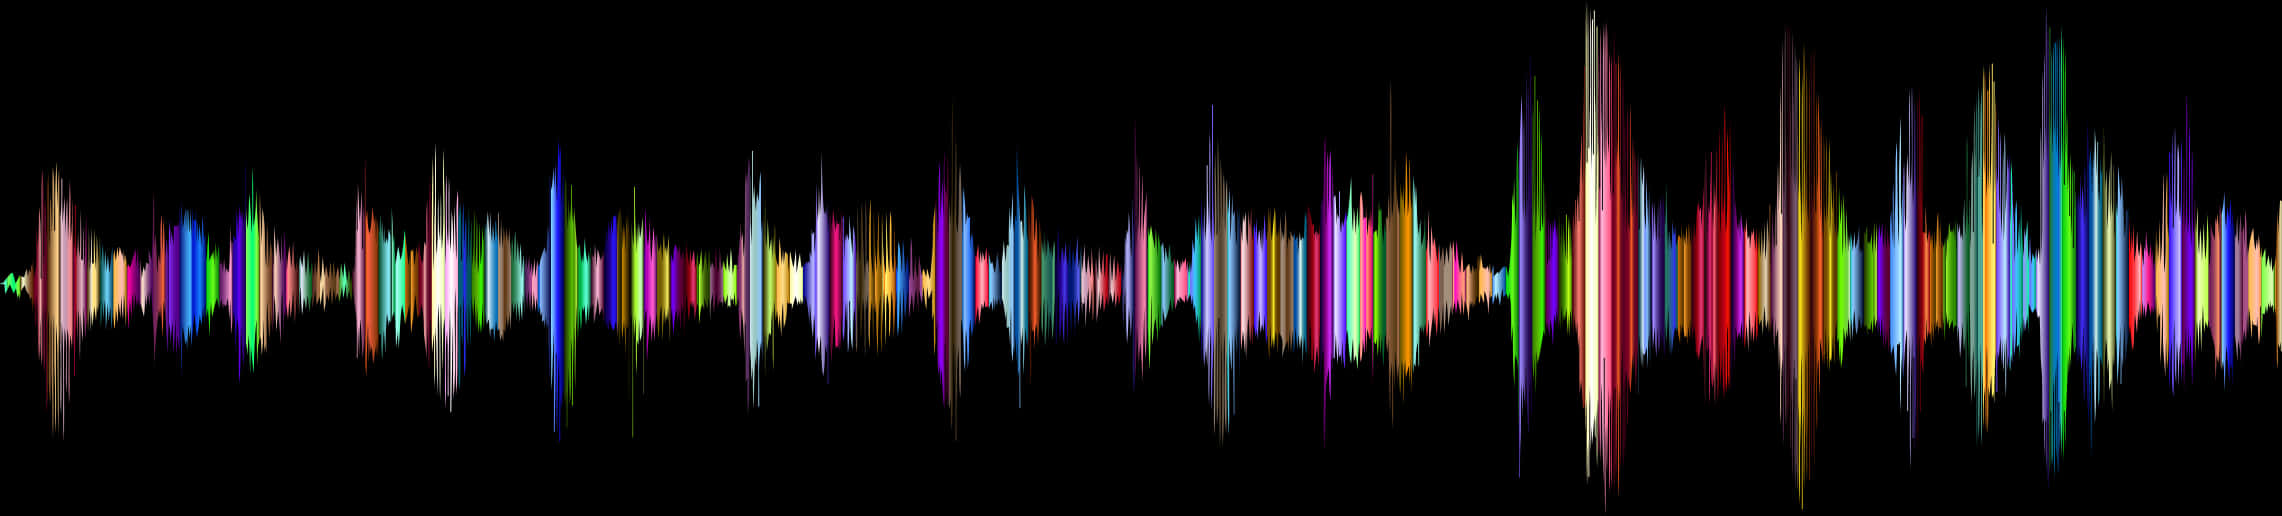 A Colorful Sound Waves On A Black Background